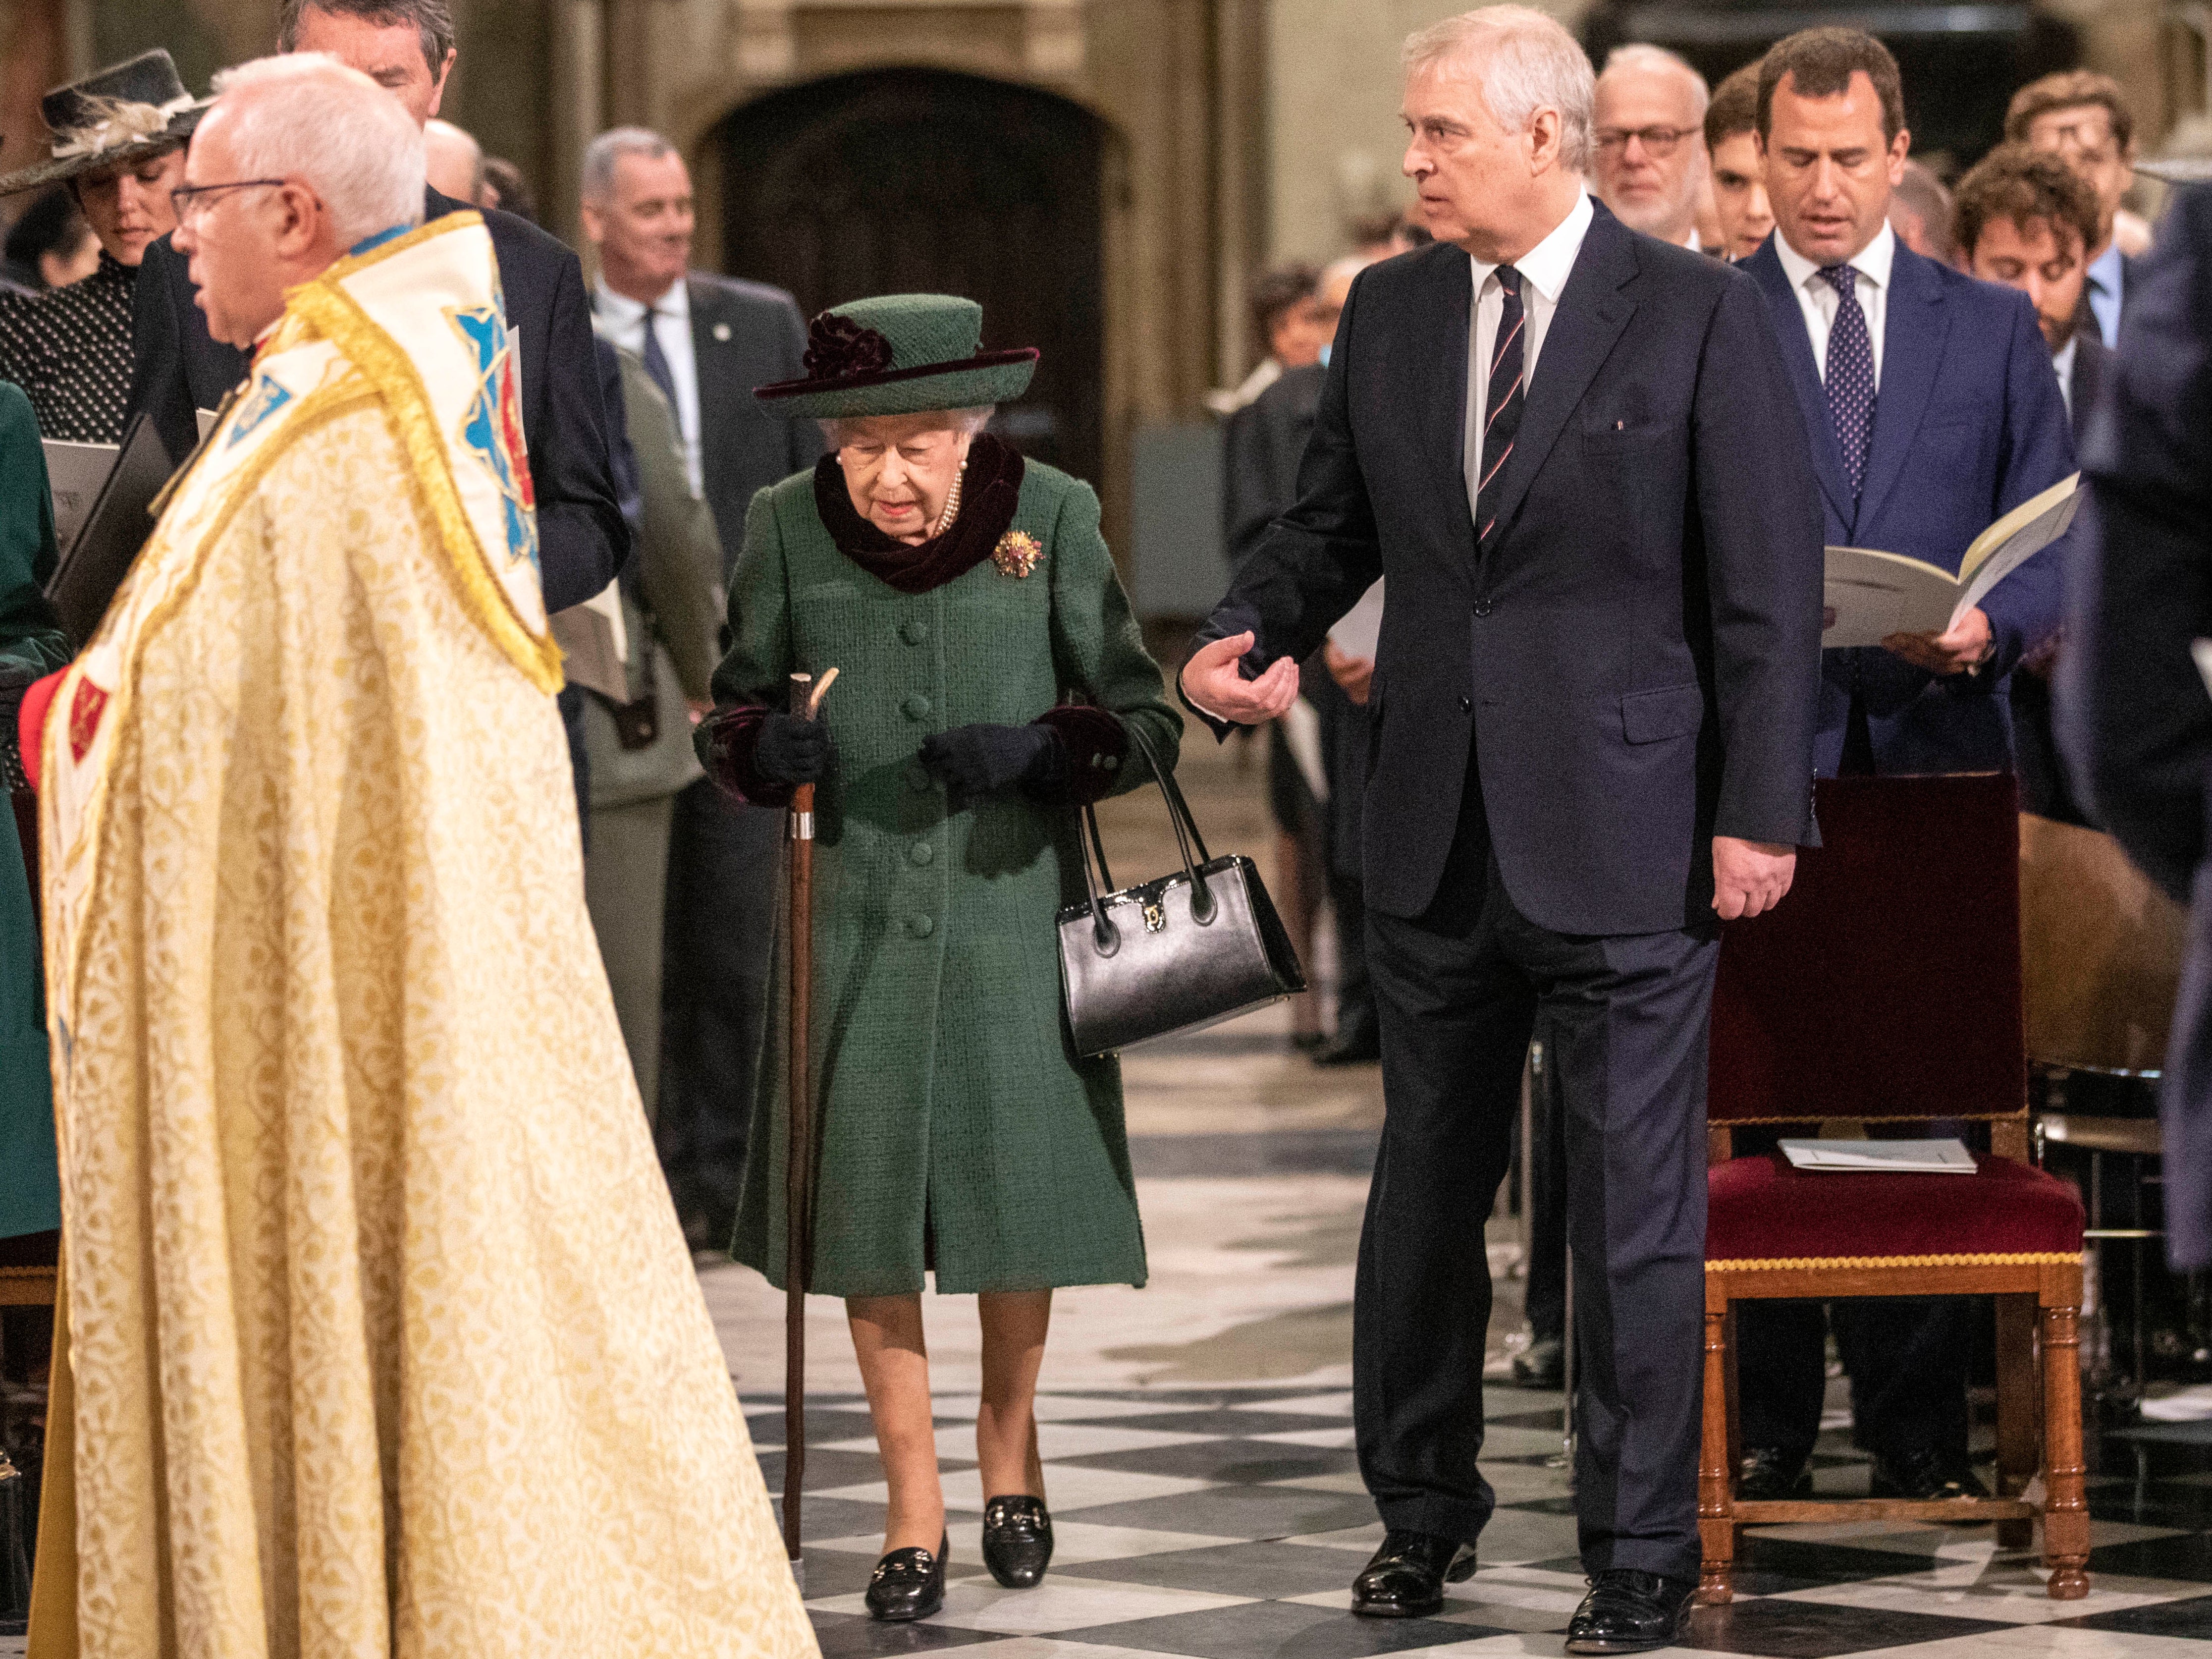 Prince Andrew accompanies the Queen to her seat at the Service of Thanksgiving for the Duke of Edinburgh in March 2022